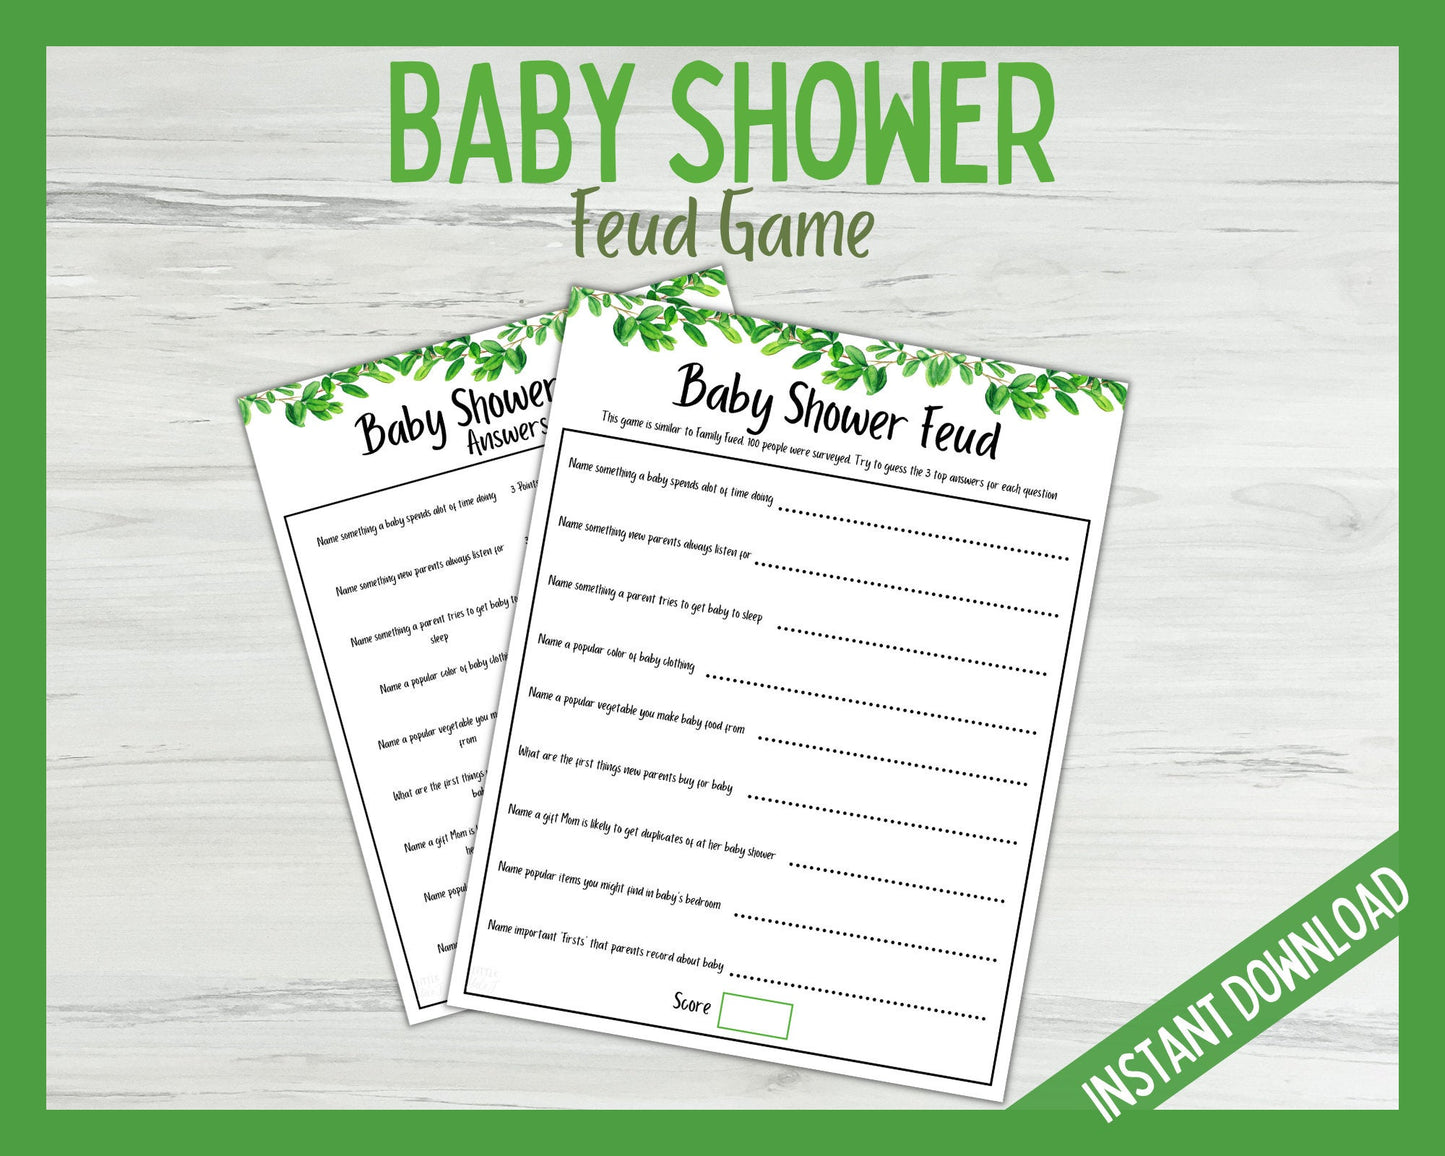 Baby Shower Feud Game - Green